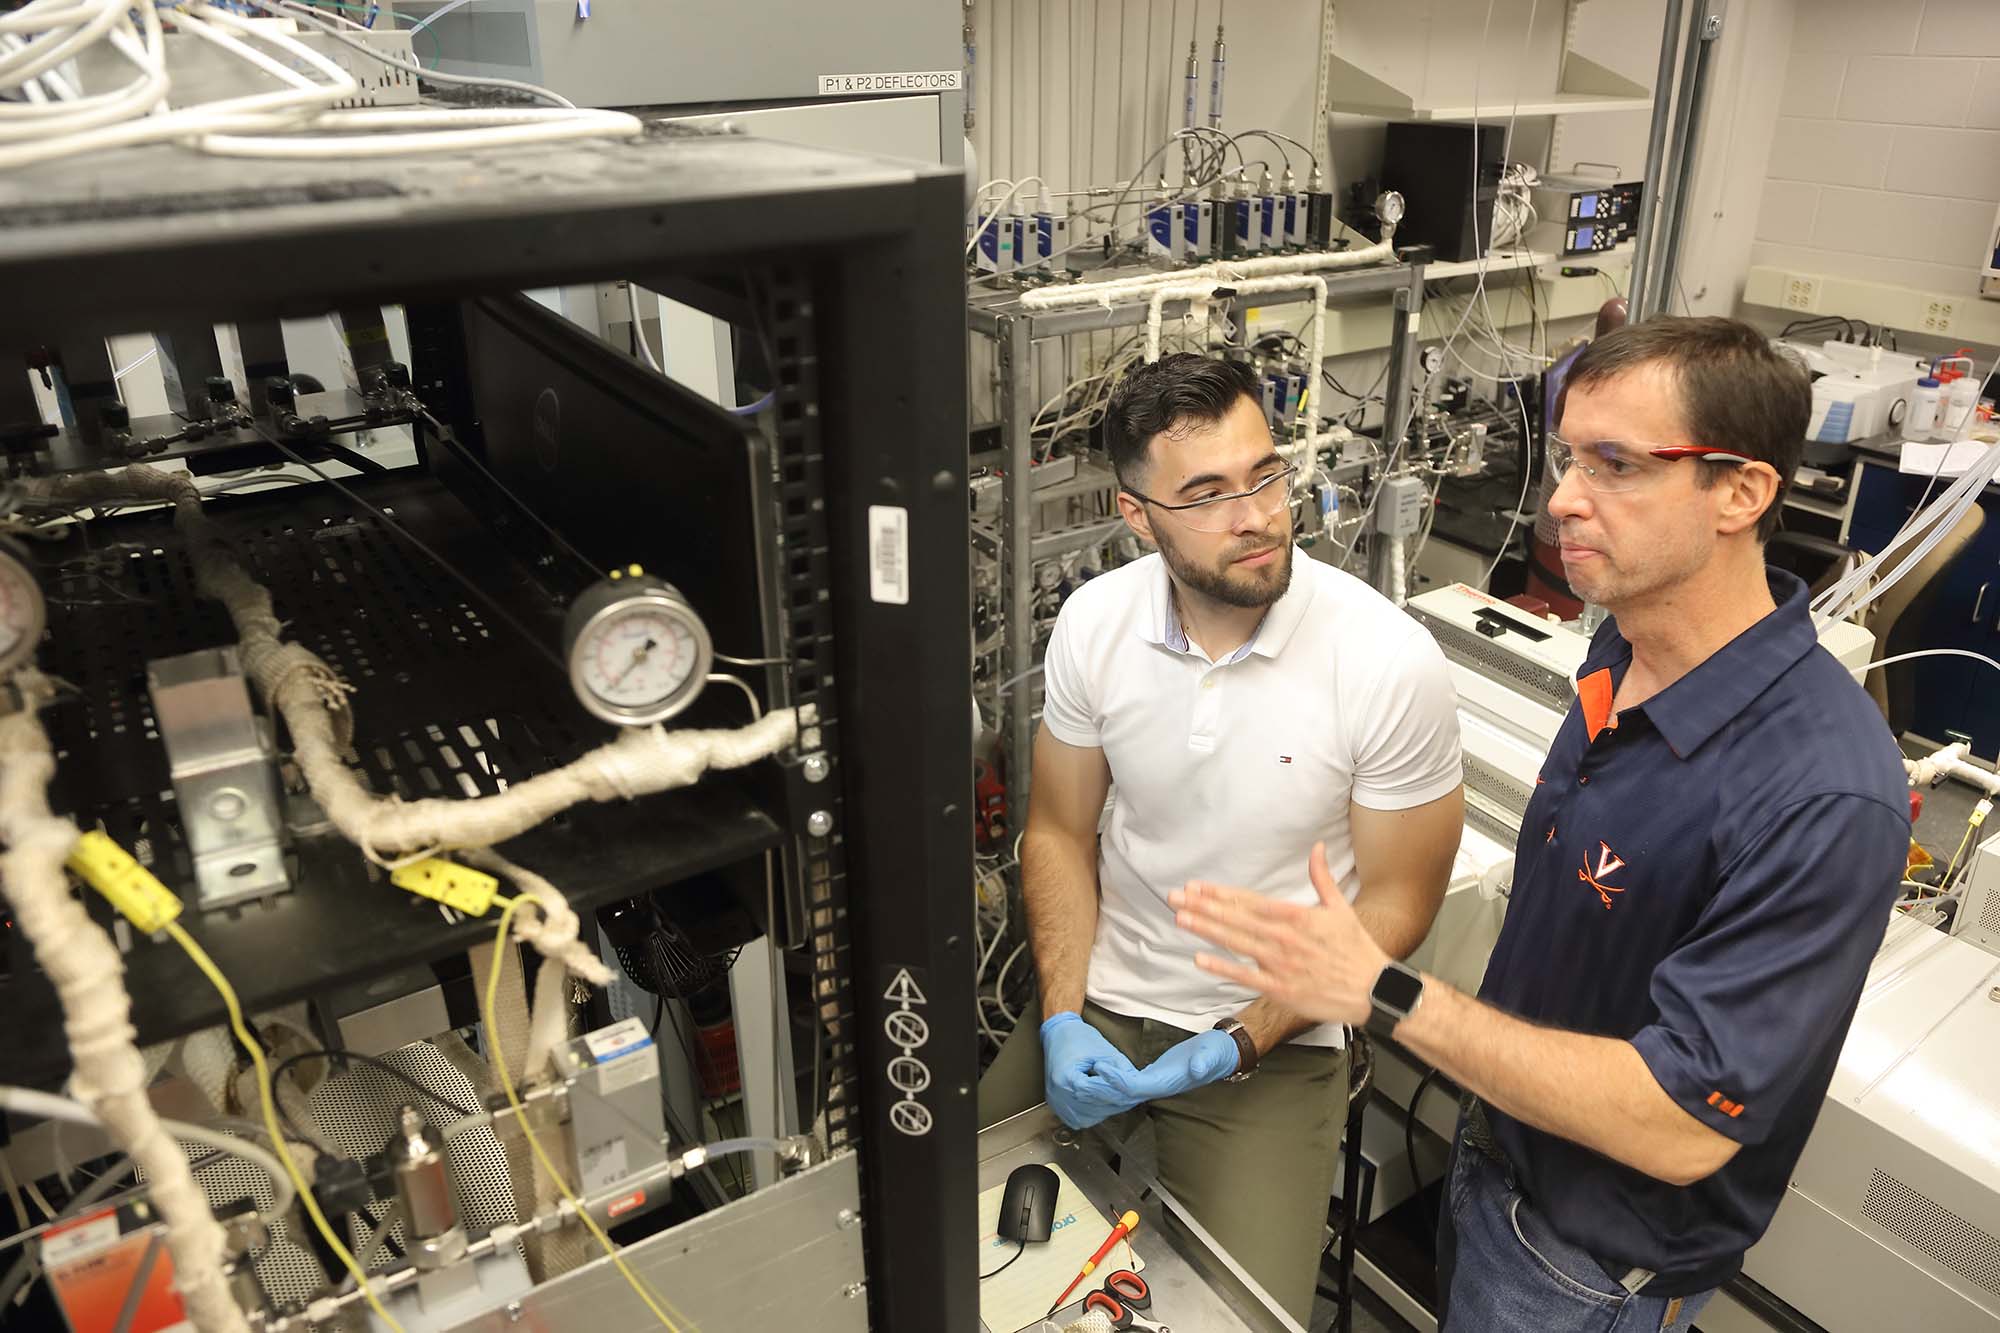 Carlos Weiler, left, William Epling, right running an experiment together